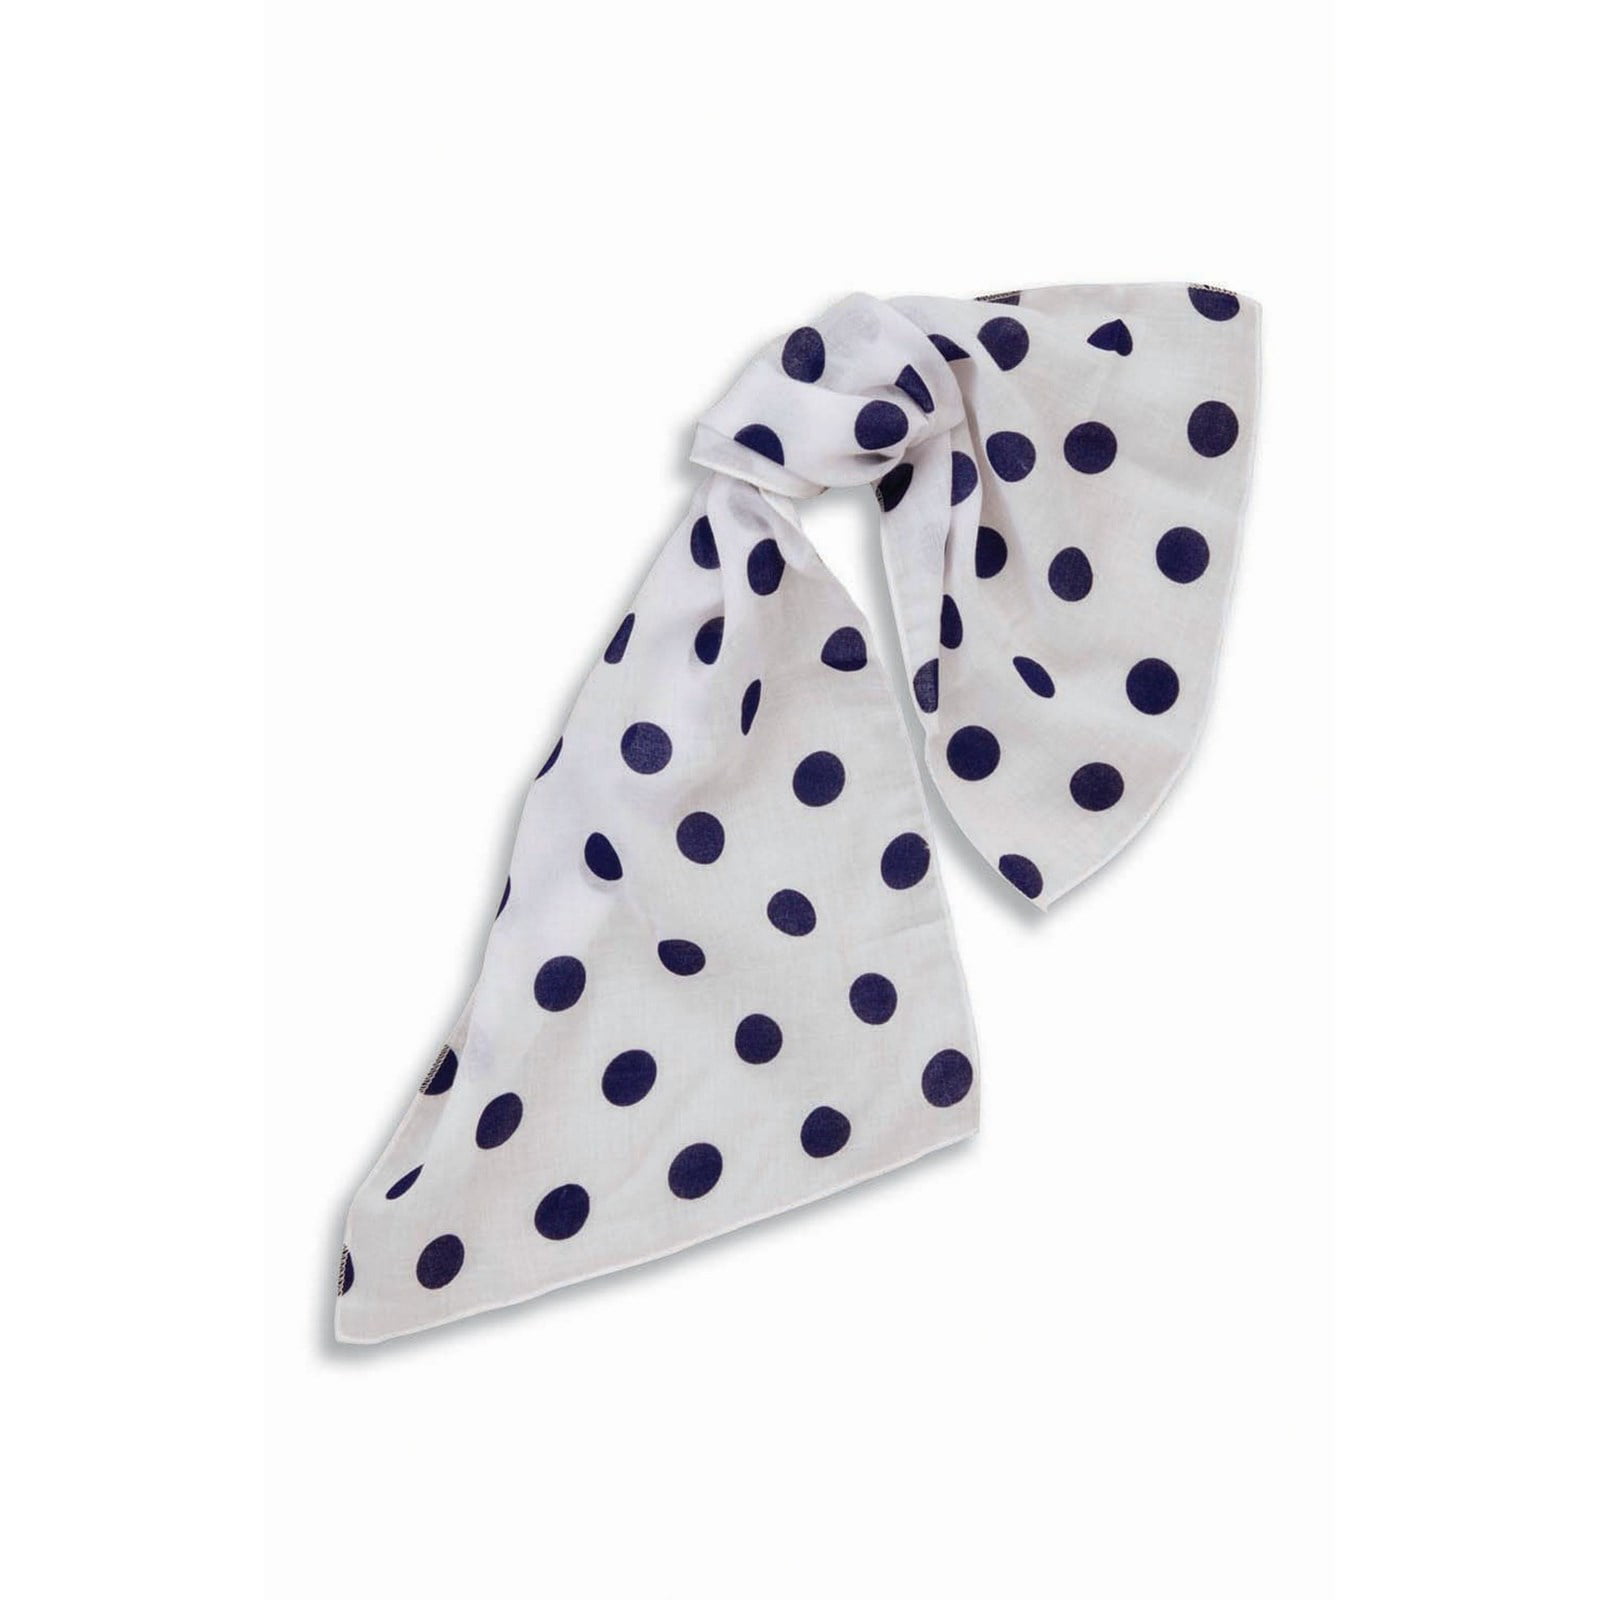 Pink and blue polka dot scarf